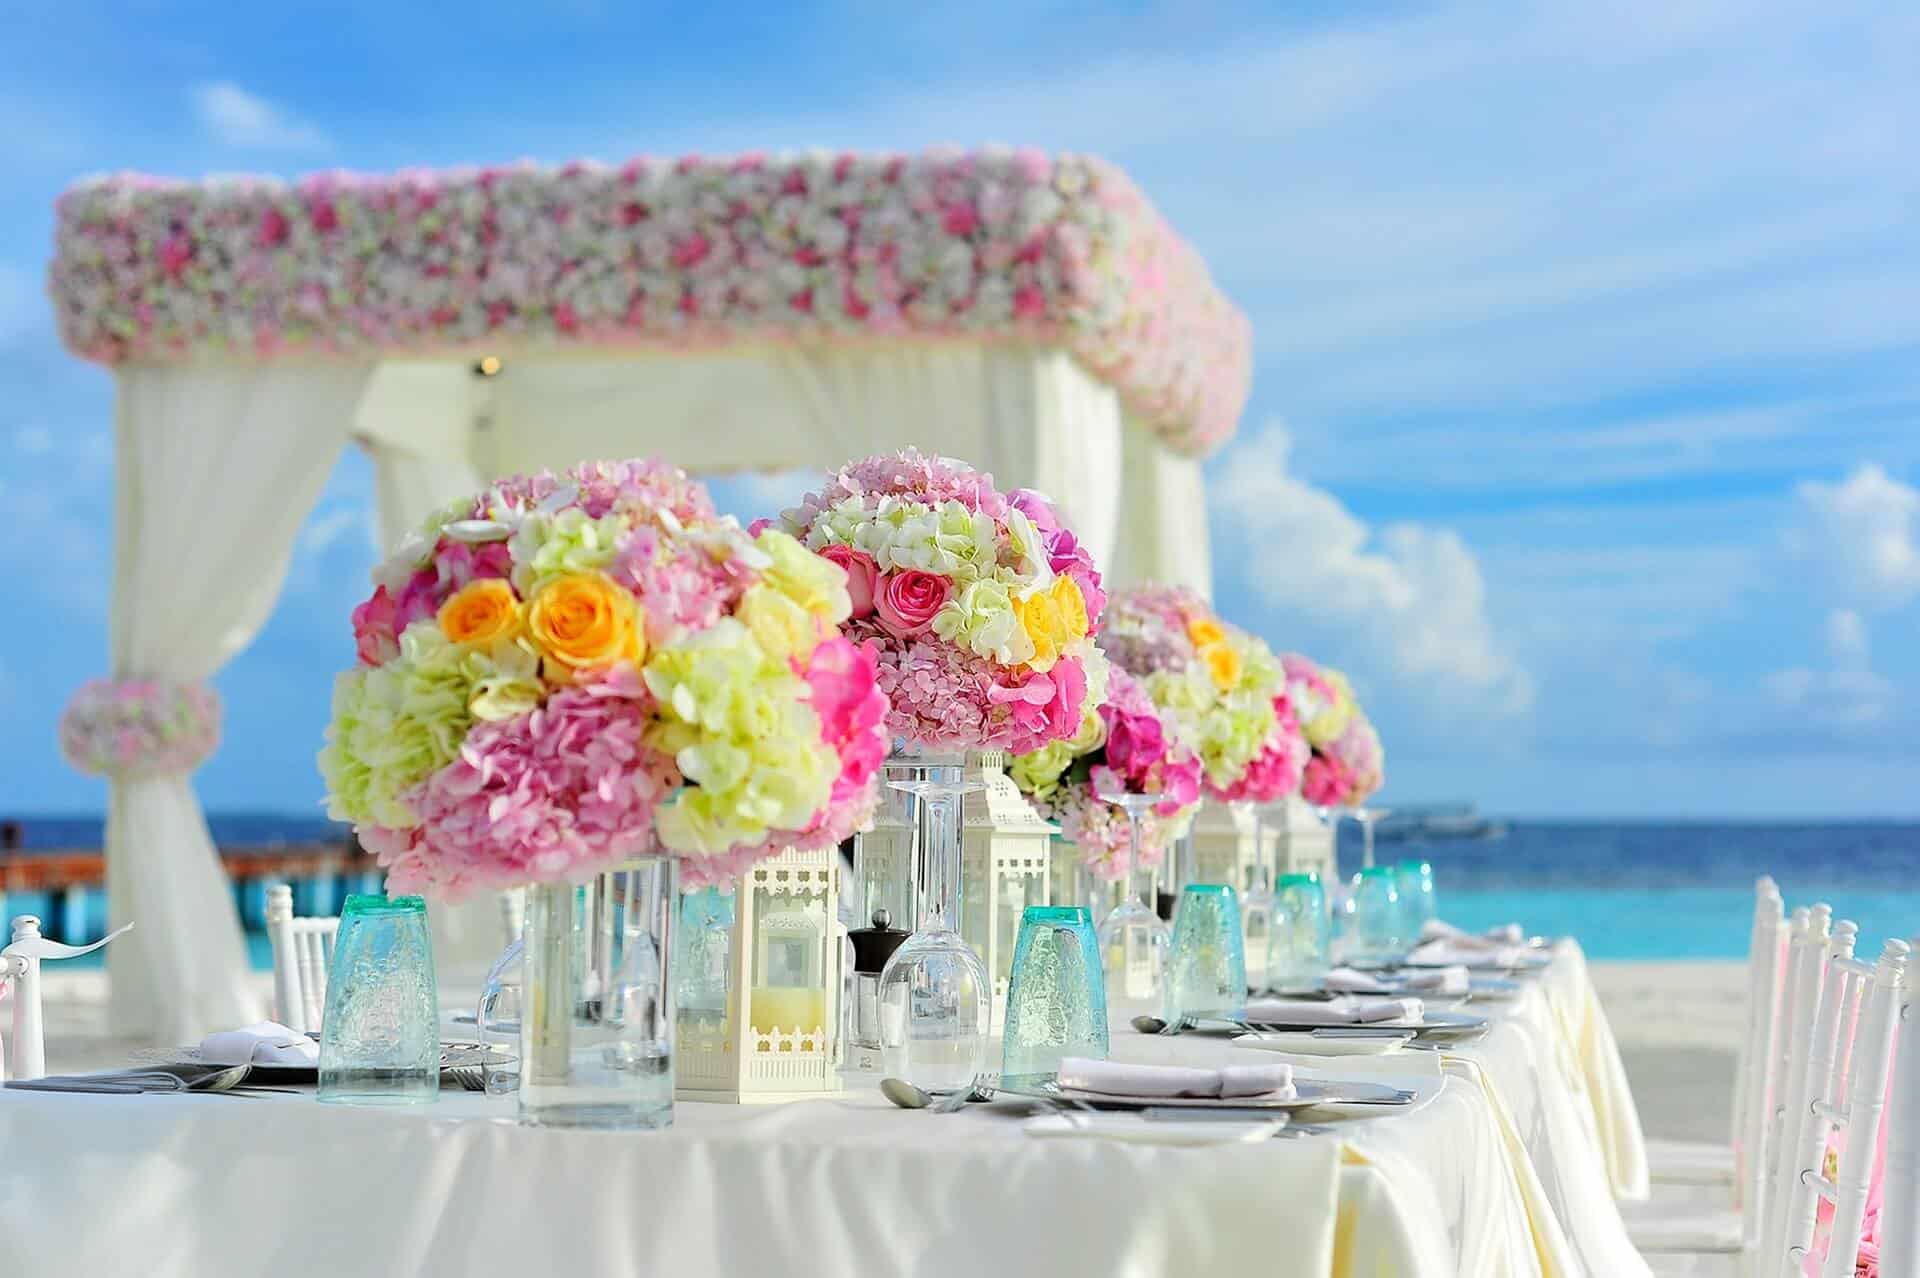 Wedding-color-schemes-for-summer-according-to-the-chosen-location-Flowers-table-sea